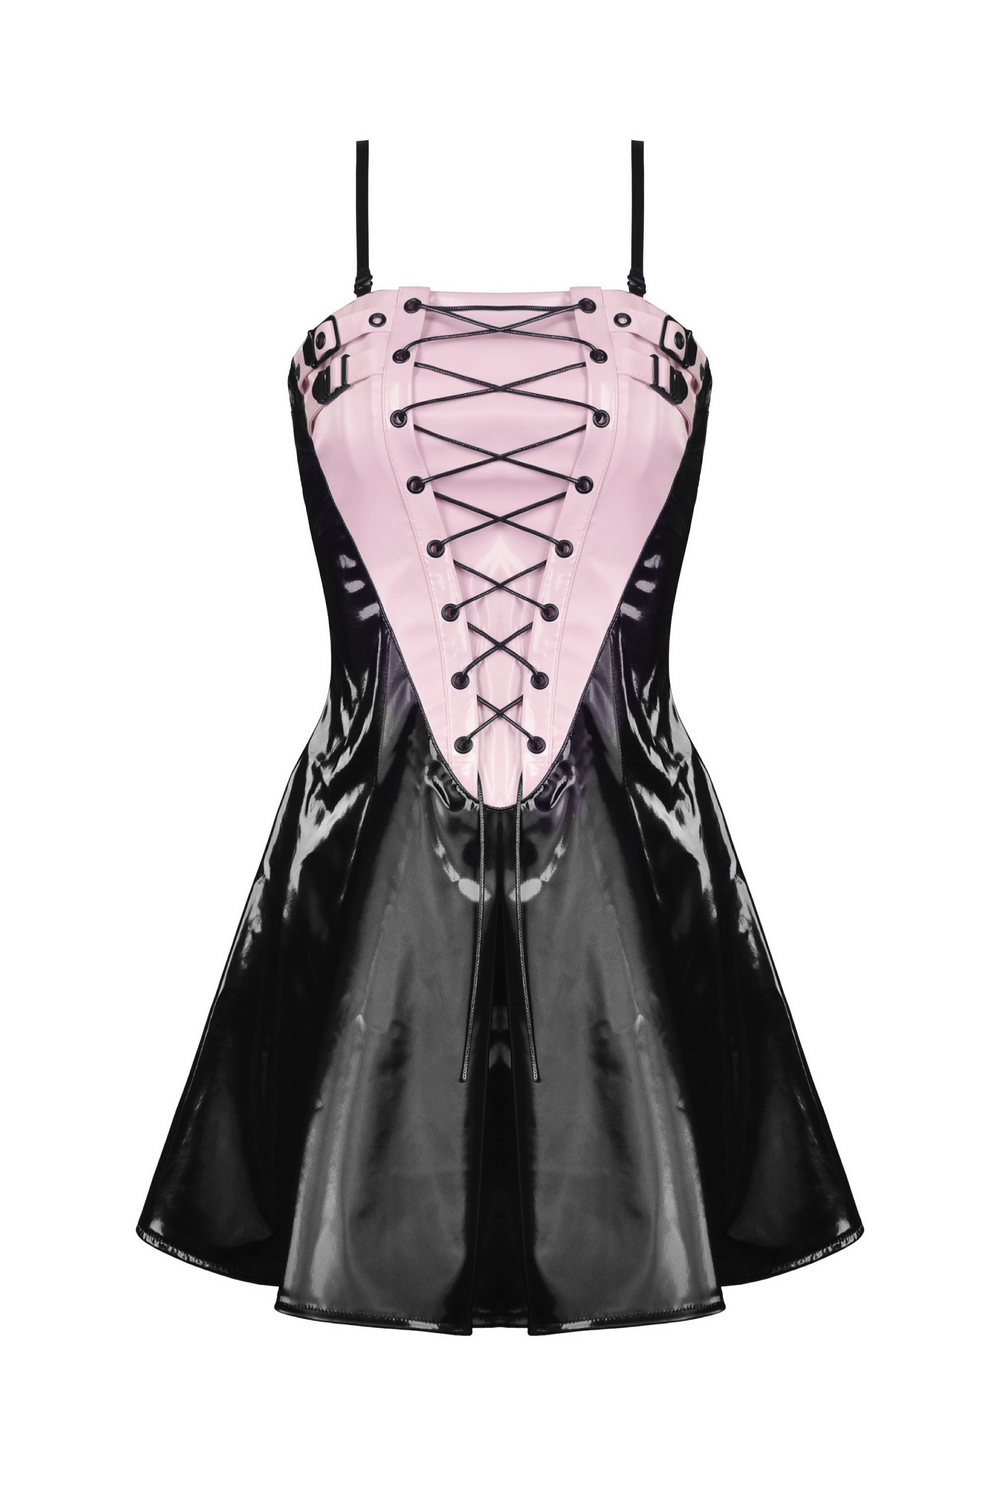 Punk Glossy Vinyl Lace-Up Mini Dress with Buckles